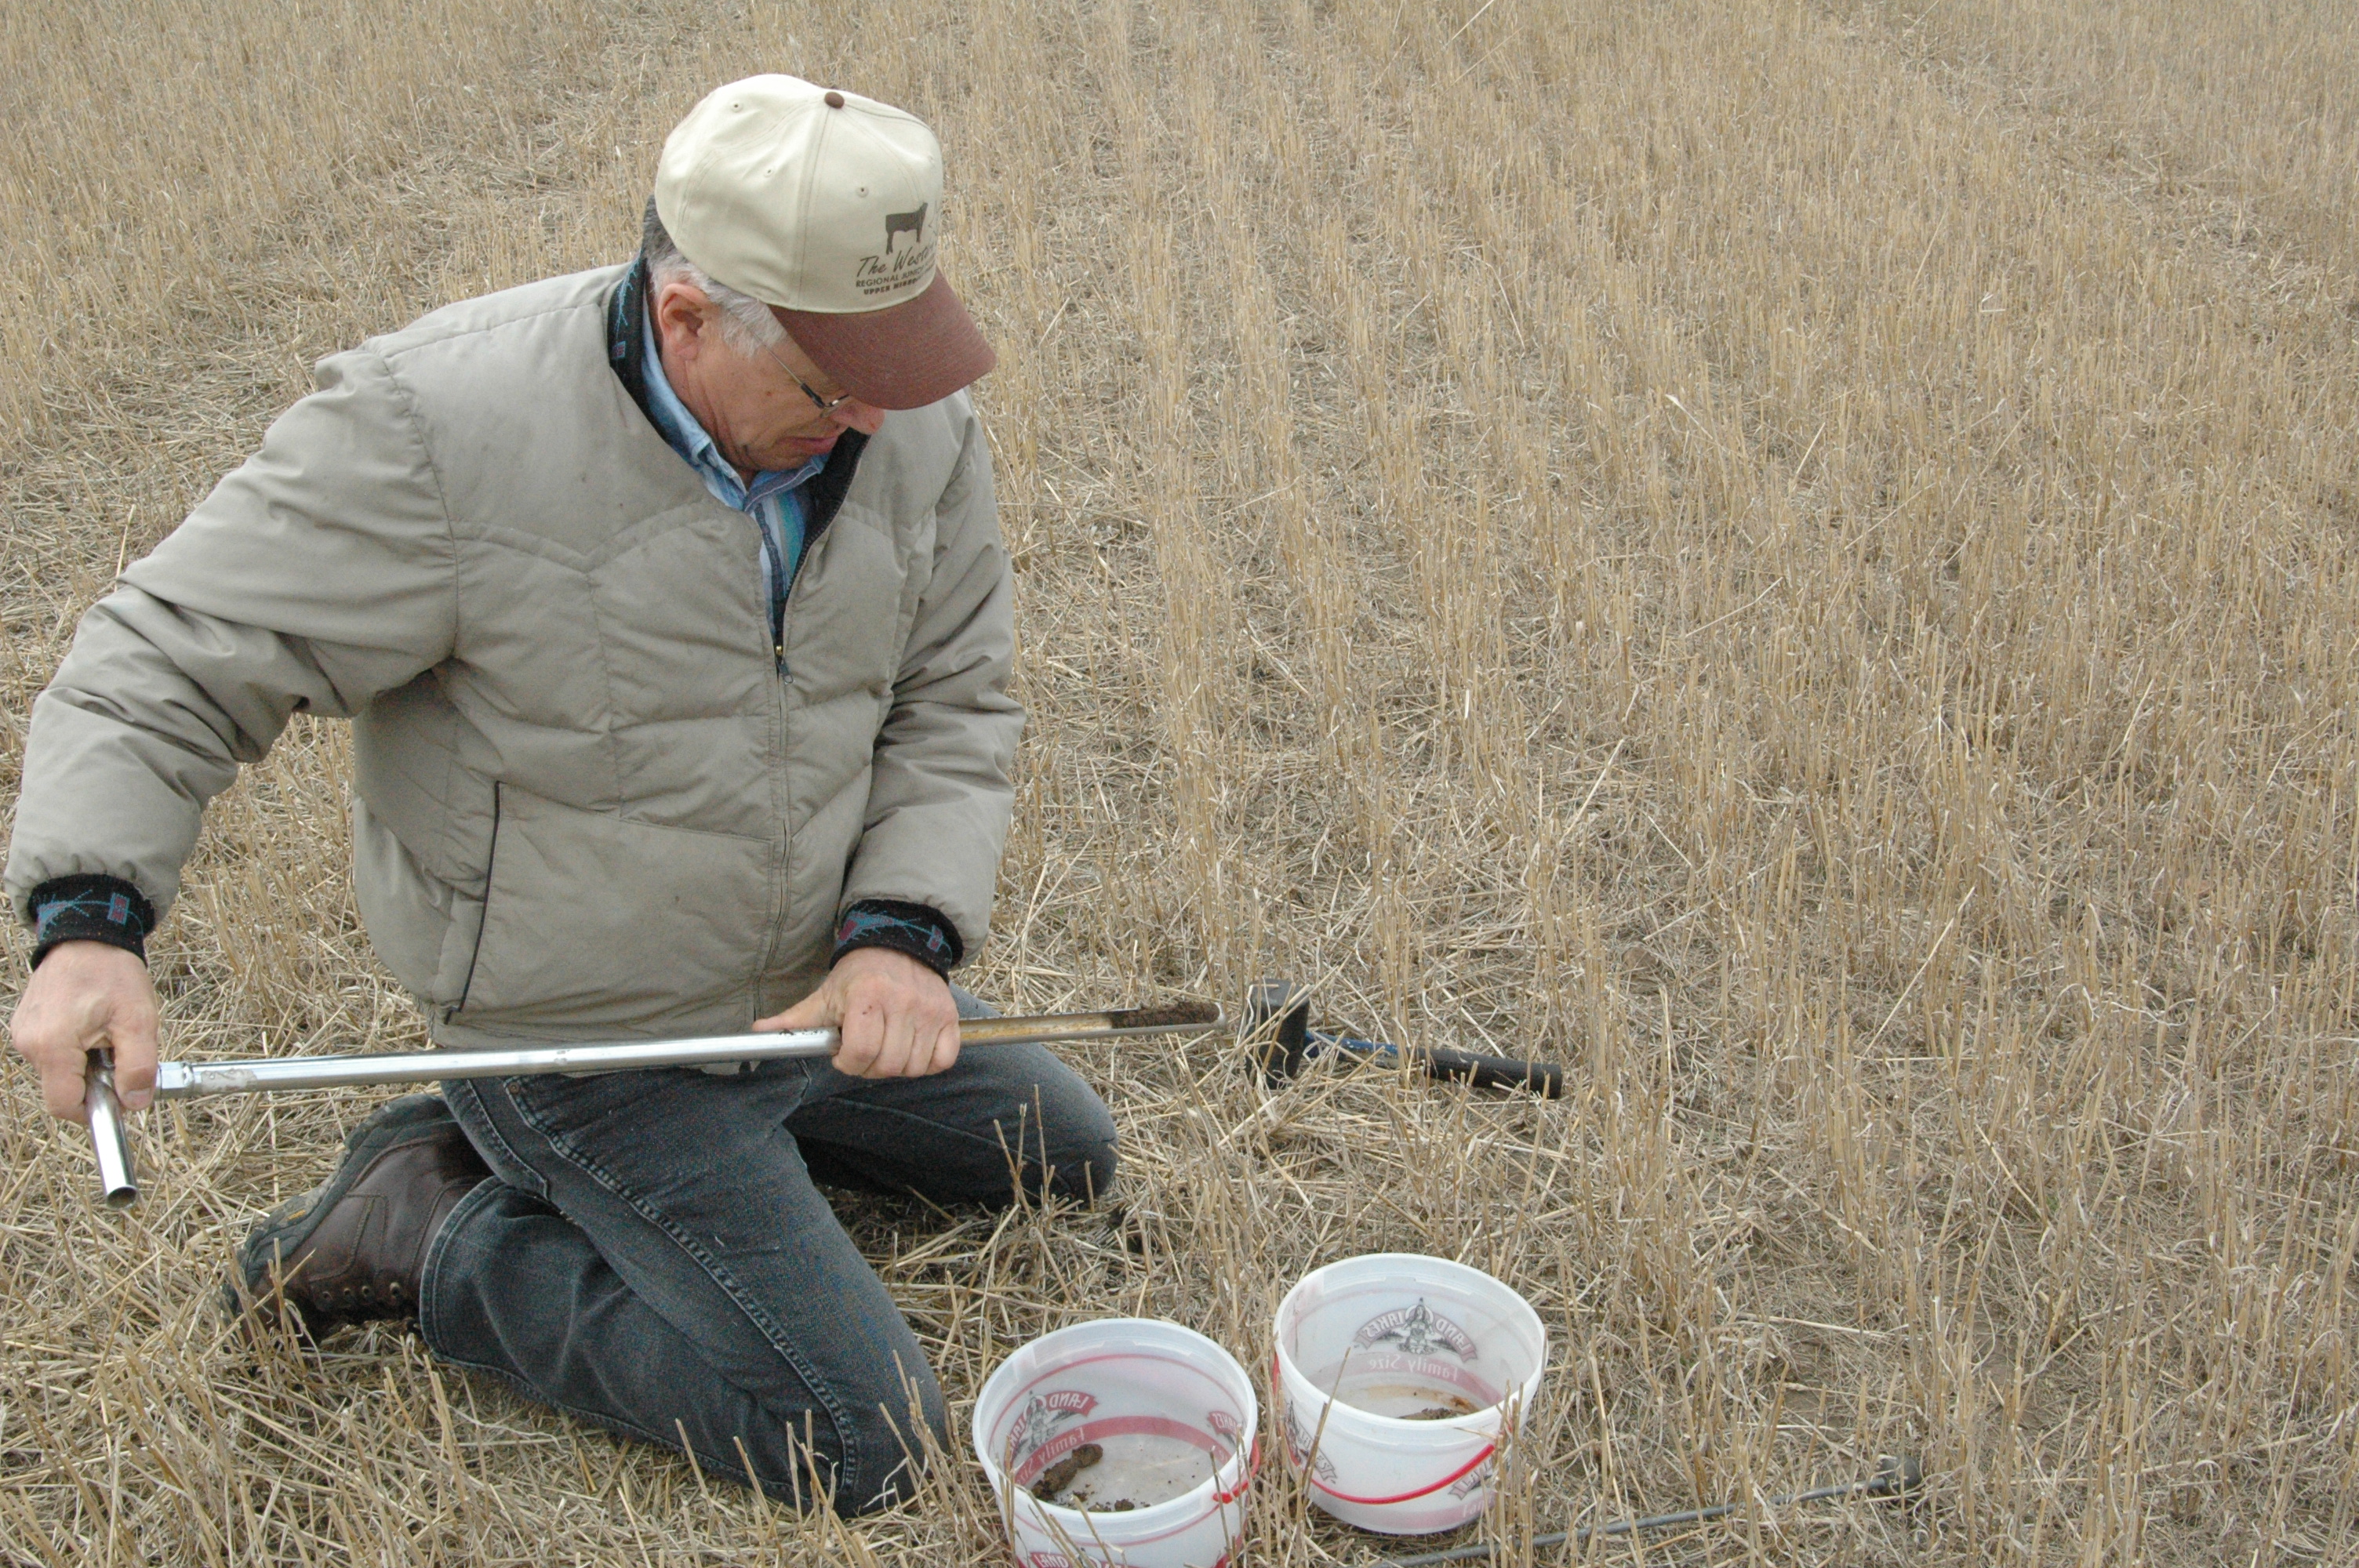 Williams County Extension agent Warren Froelich takes a soil sample.